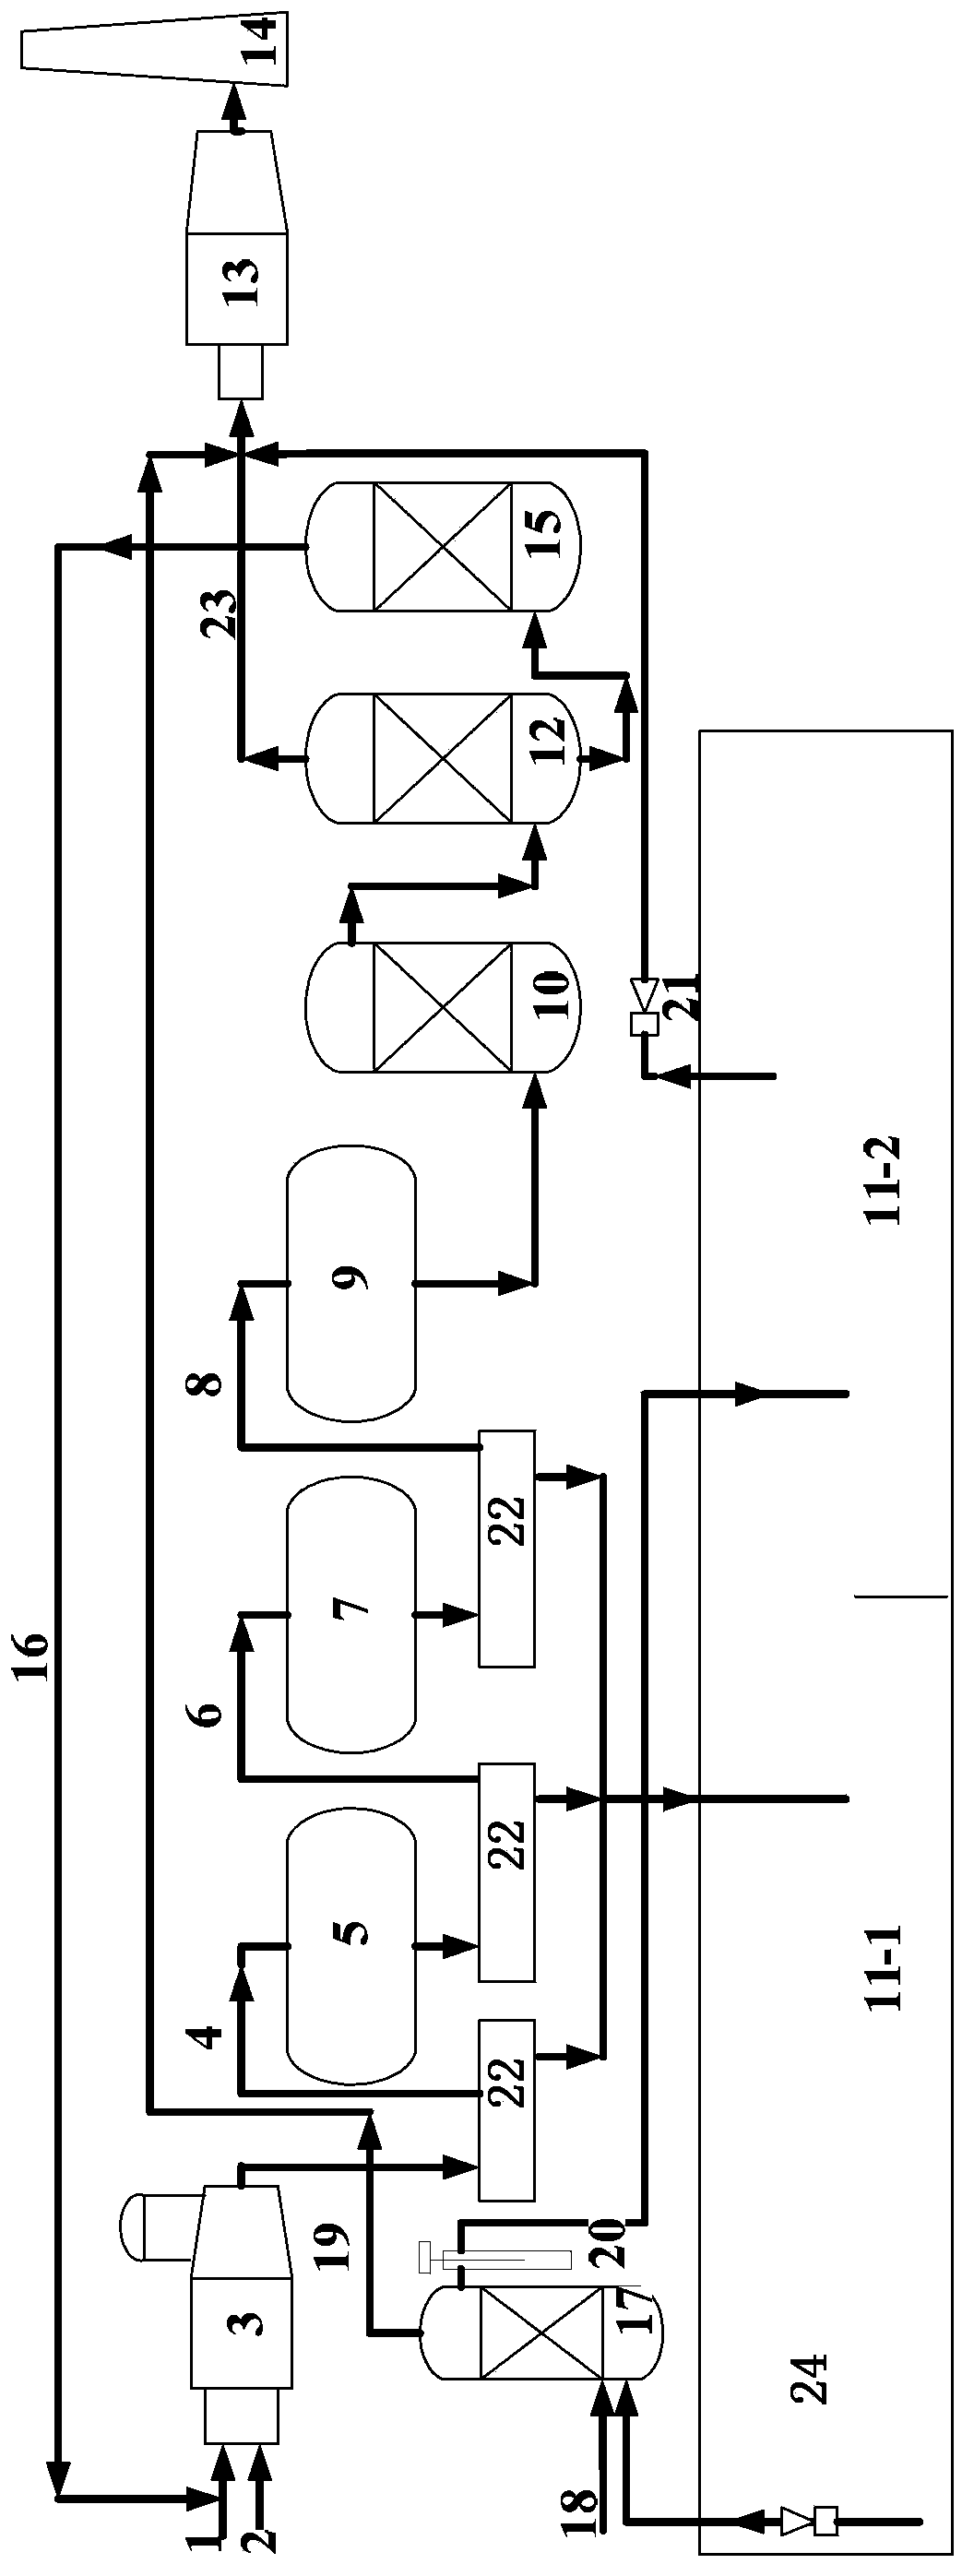 Treatment method for liquid sulfur degassing in sulfur recovery process